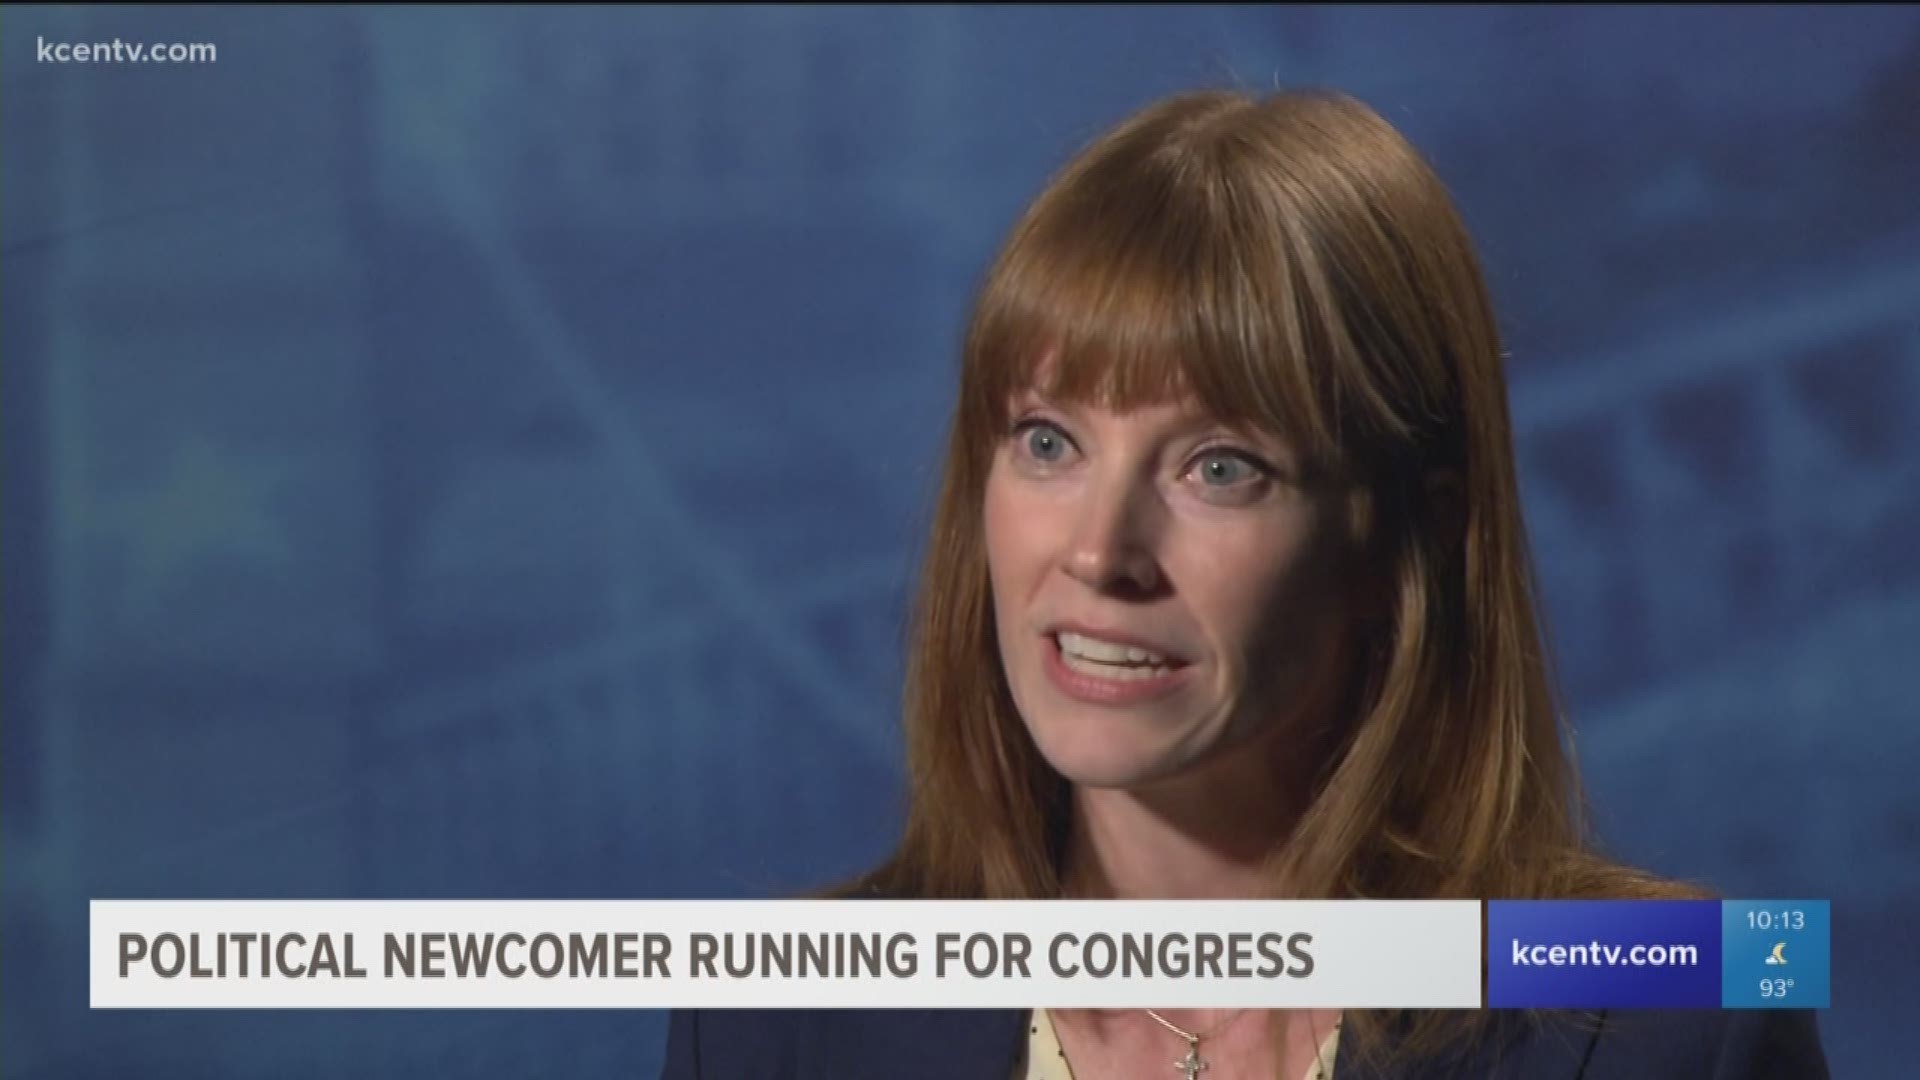 A political newcomer and mother of four said it's time for change in congress. 